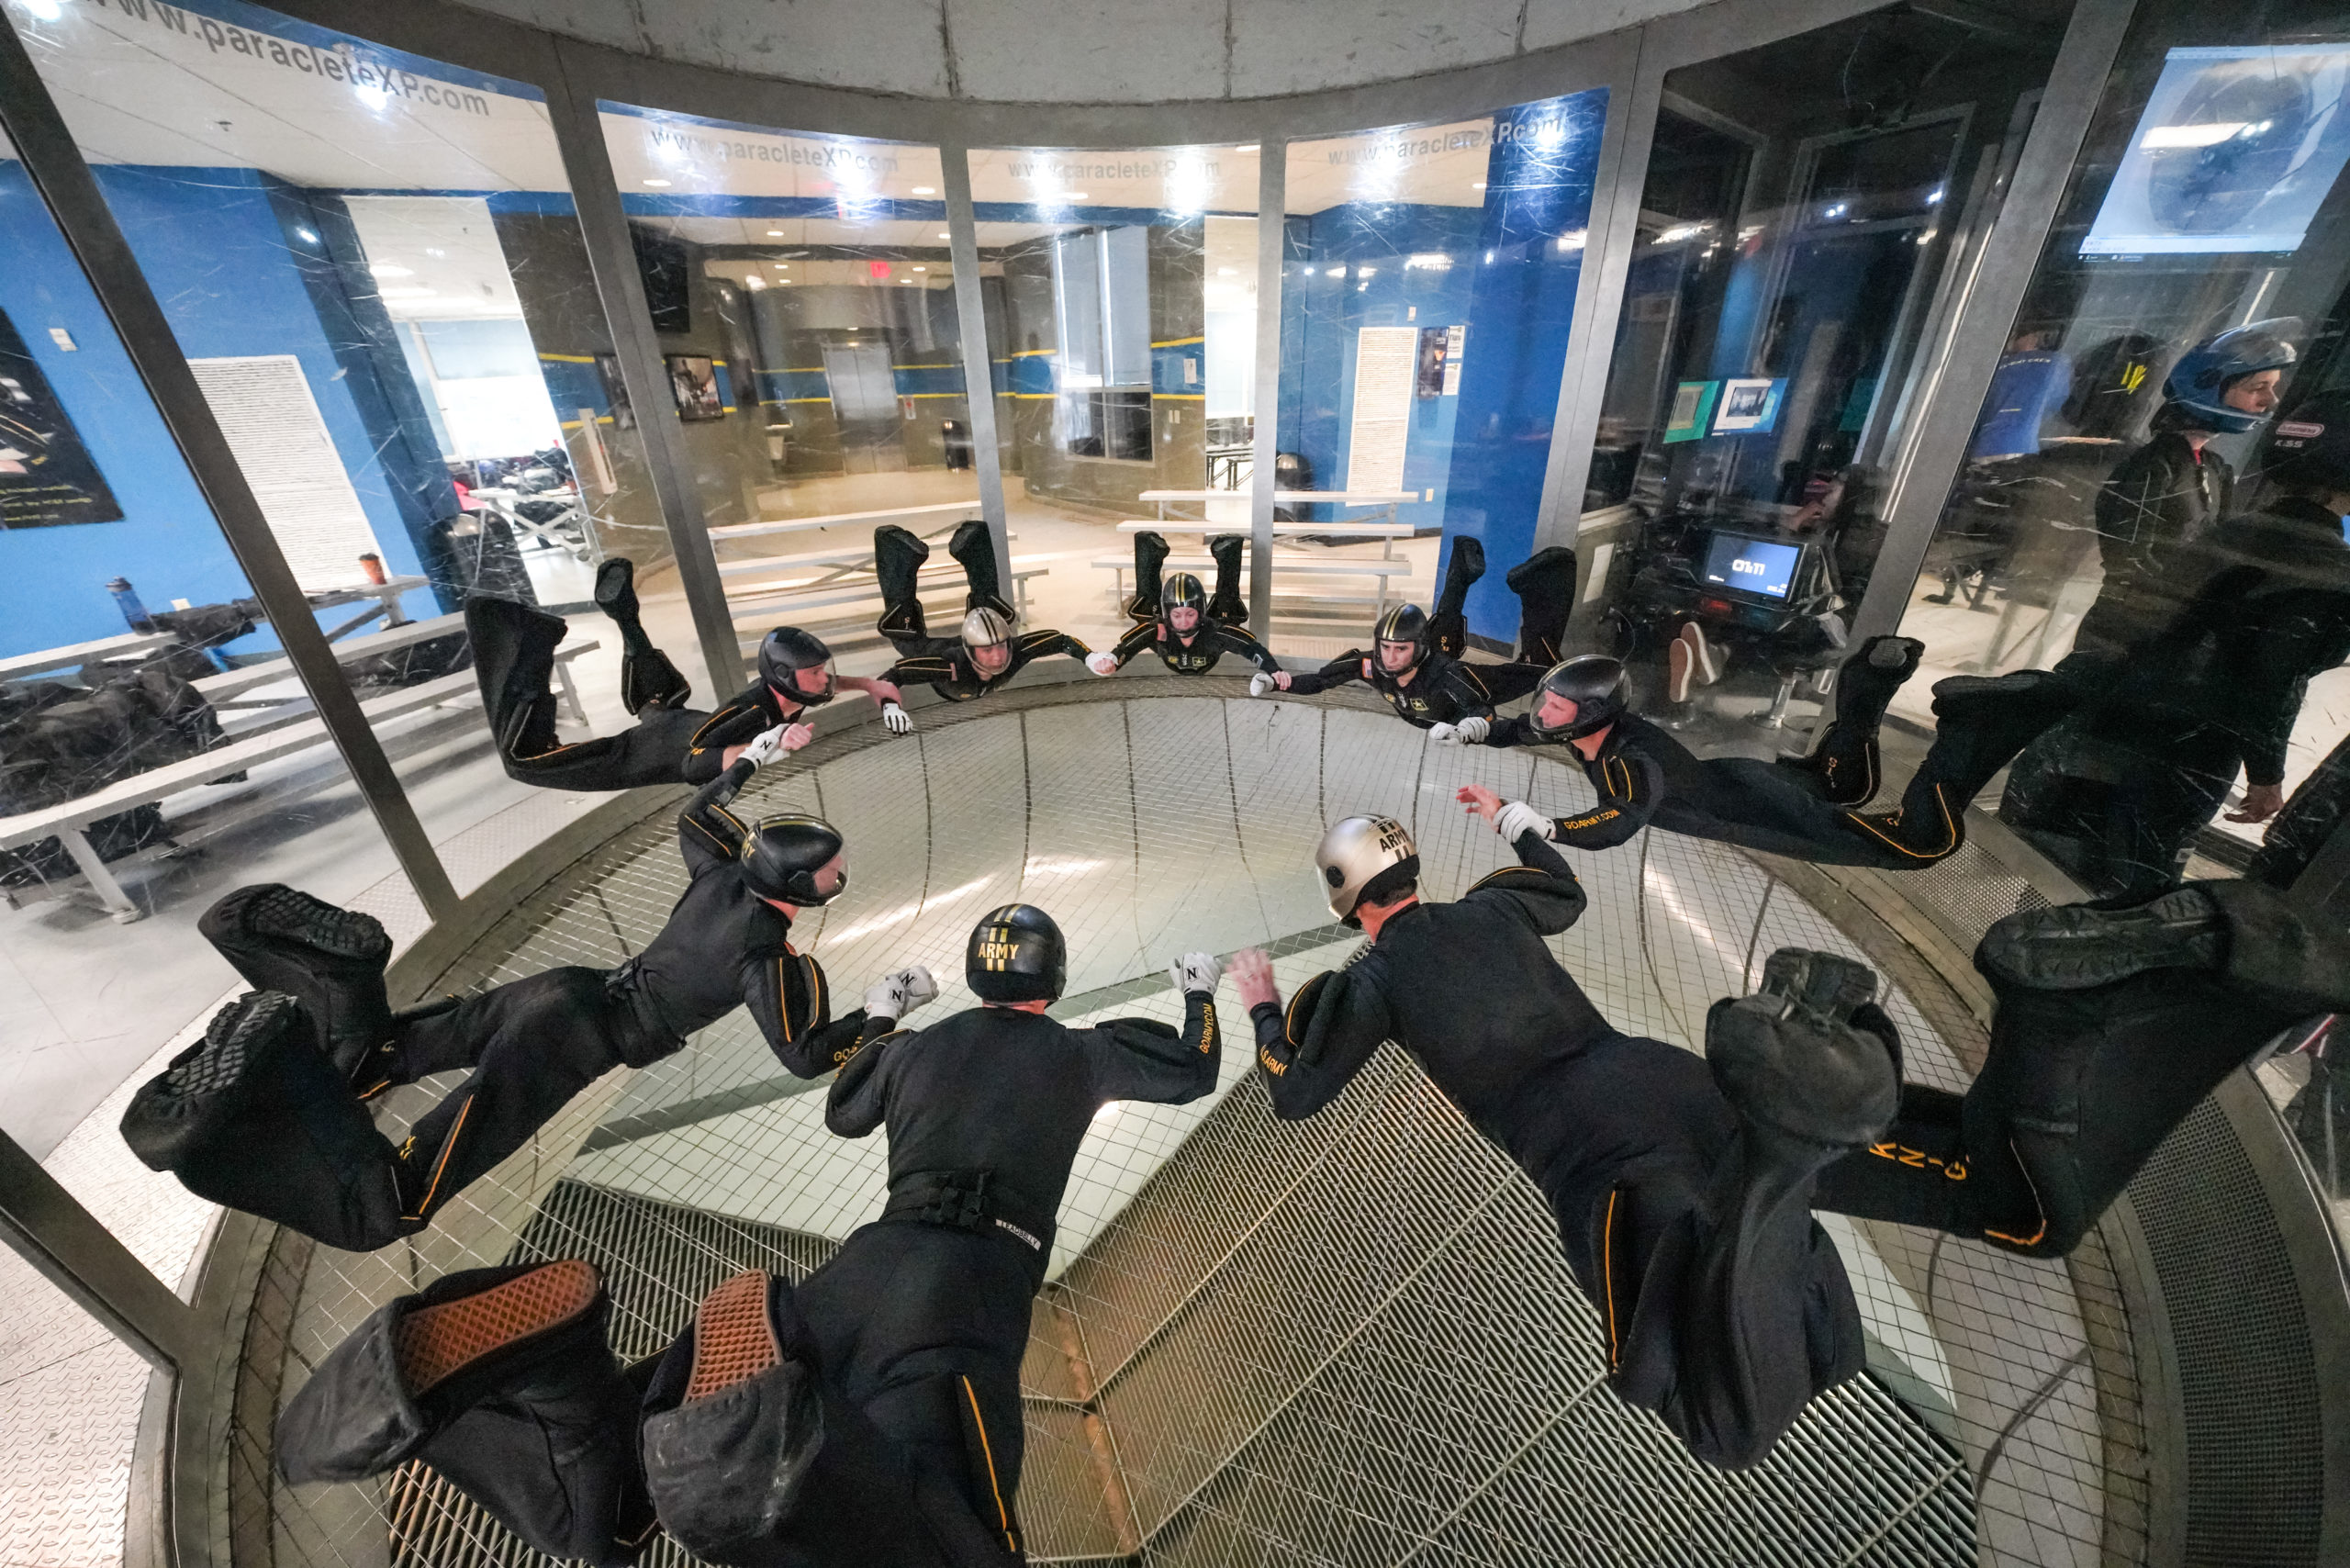 Indoor Skydiving and Zero Gravity | Paraclete XP Indoor Skydiving